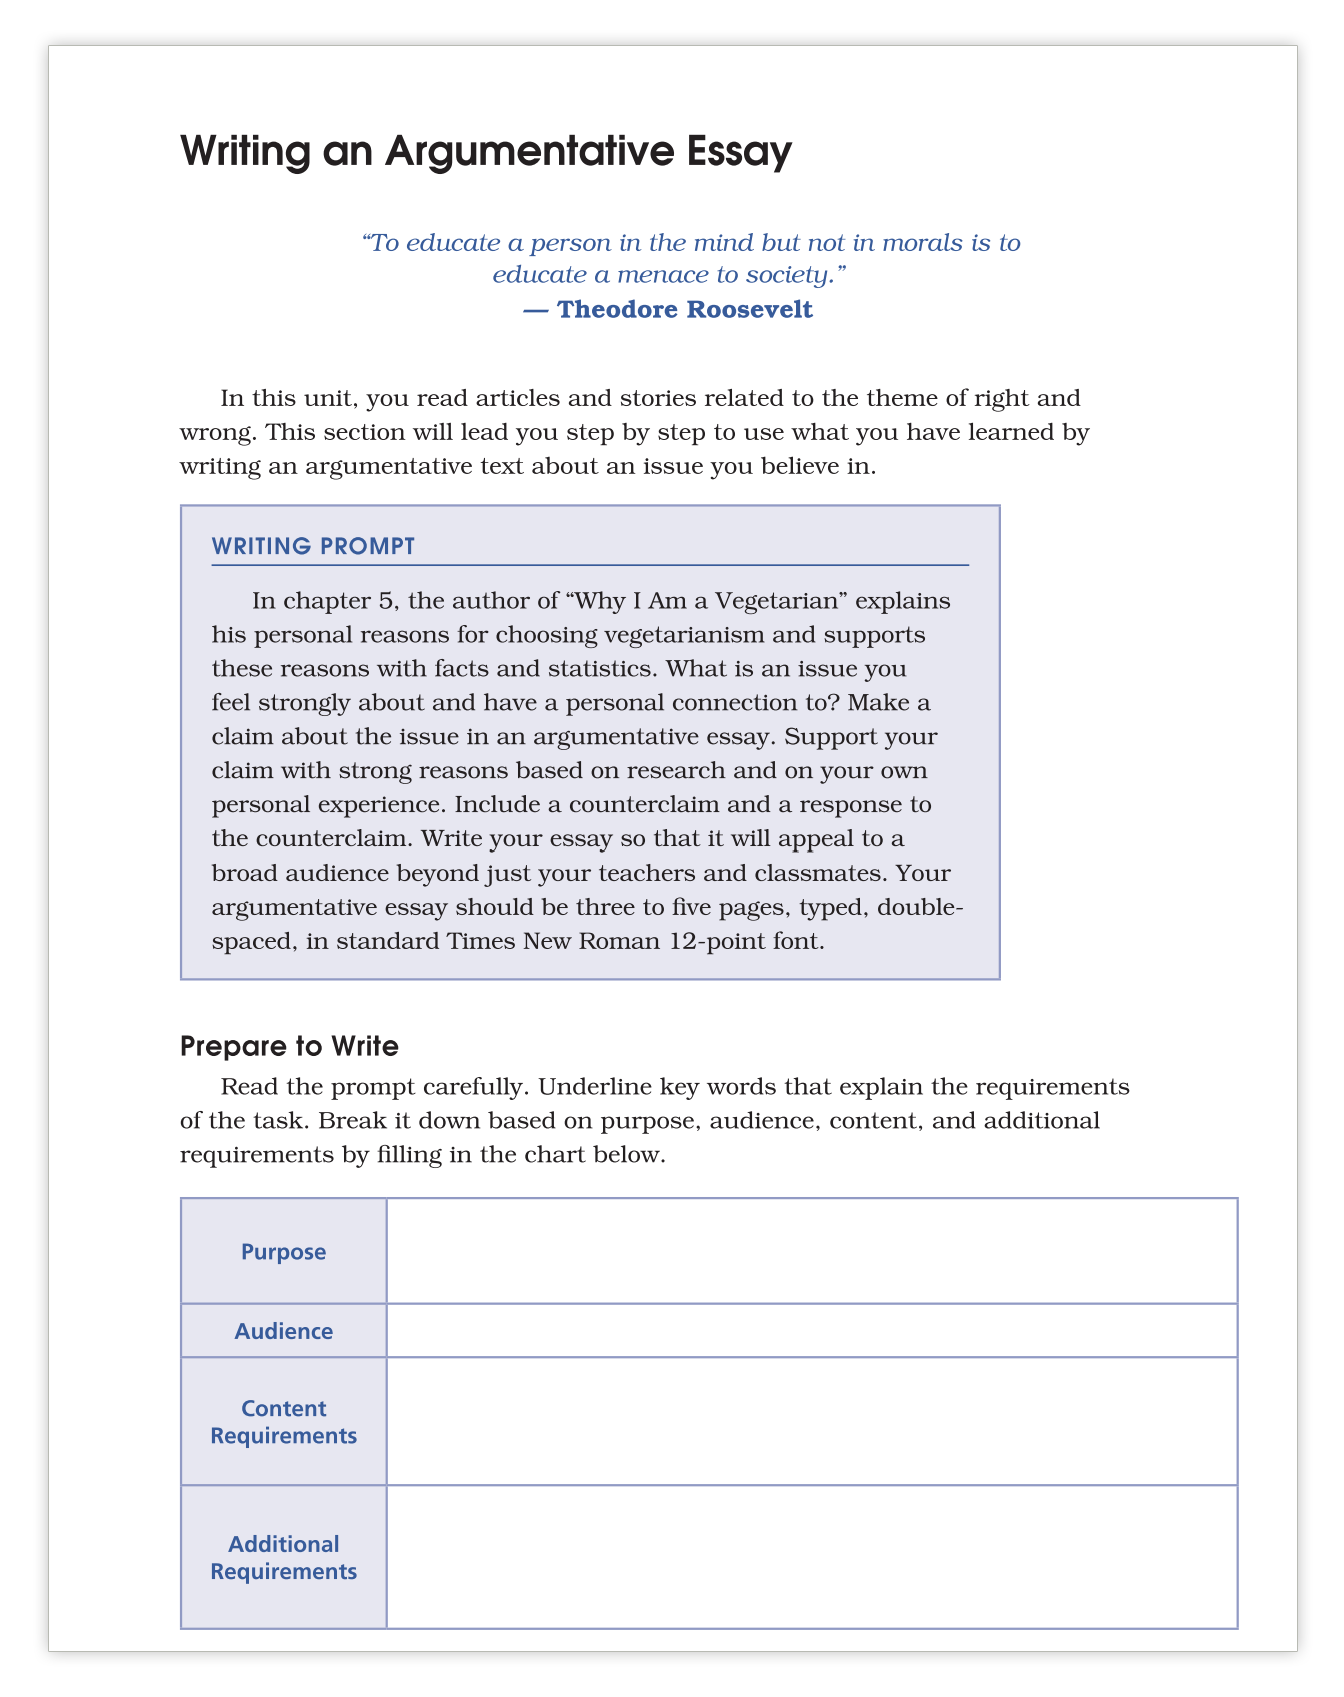 example of student edition page for writing an argumentative essay